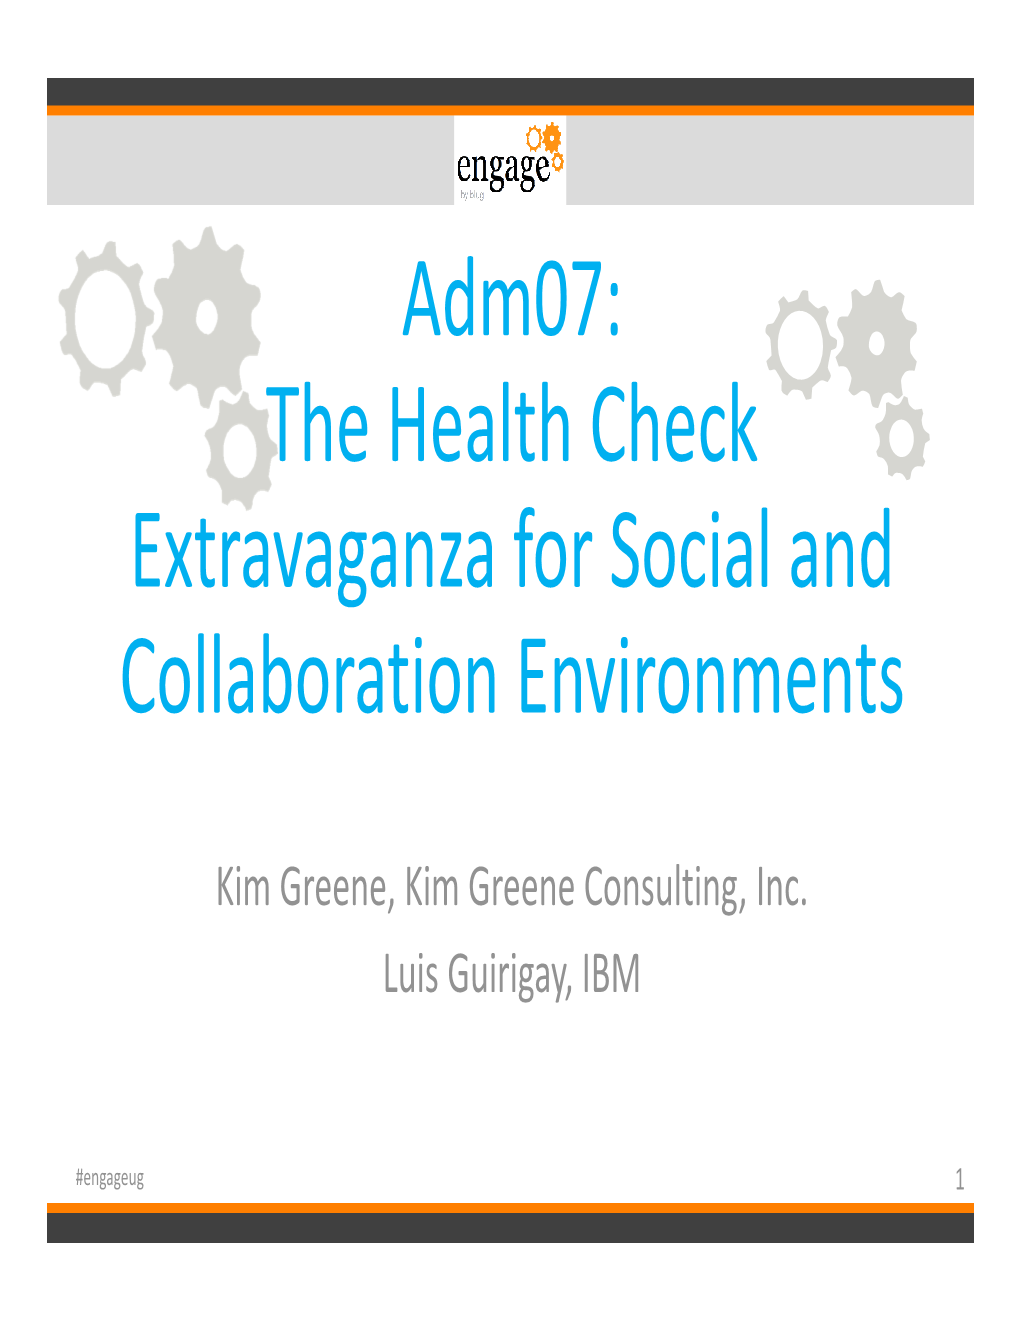 The Health Check Extravaganza for Social and Collaboration Environments